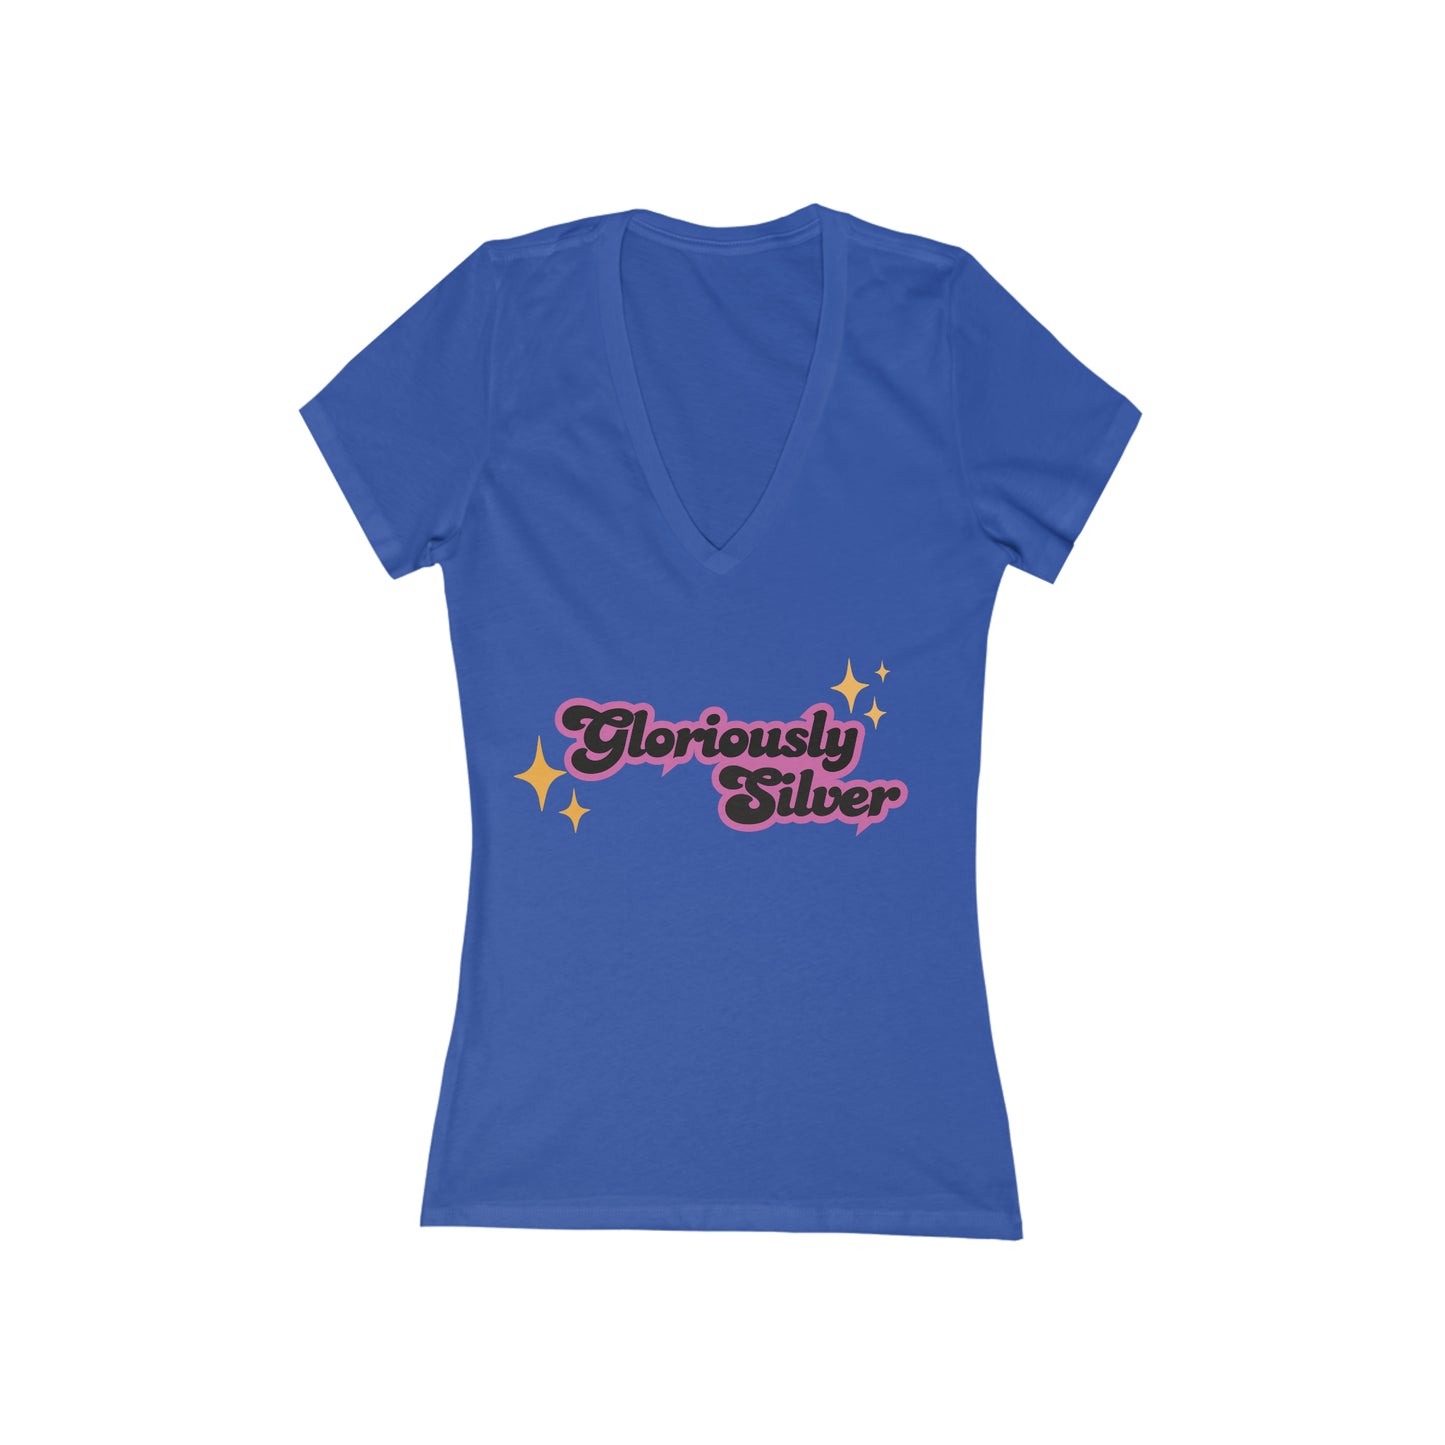 Gloriously Silver, short sleeve deep v-neck t-shirt, for women embracing silver and gray hair